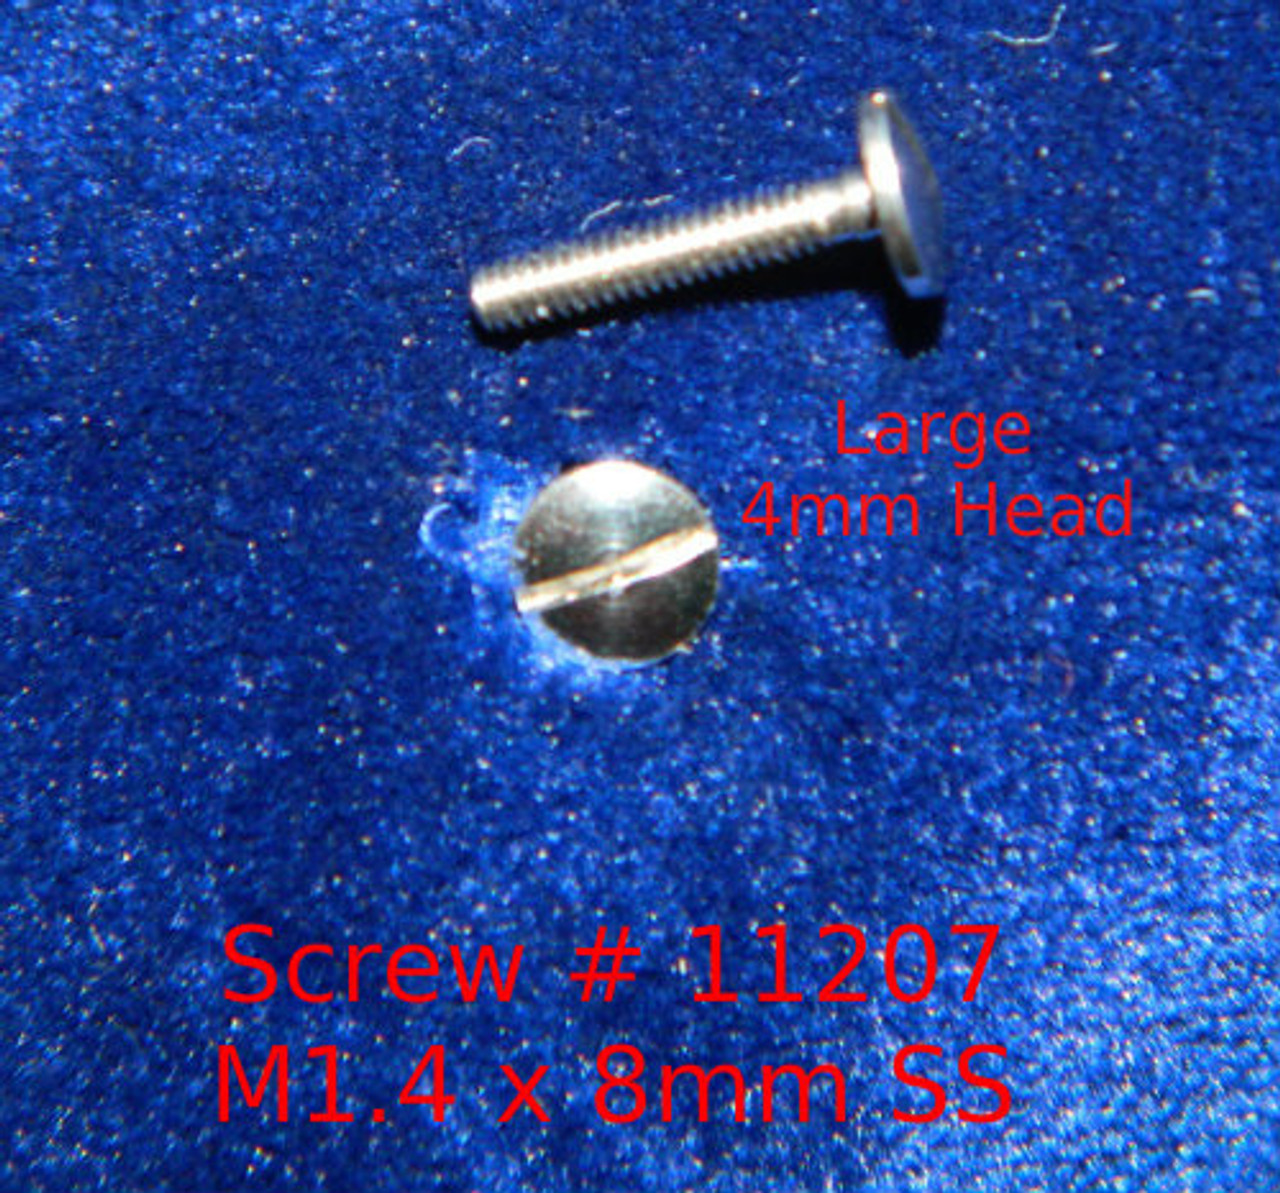 Machine Screw Special
Thread M1.4
Pitch .30mm
Head Diameter 4.0mm (Large Head Diameter)
Threaded Length 8.2mm (Max)
Overall Length 9.0mm
Material Stainless Steel, Finish Color Silver
Price is for 100 count package